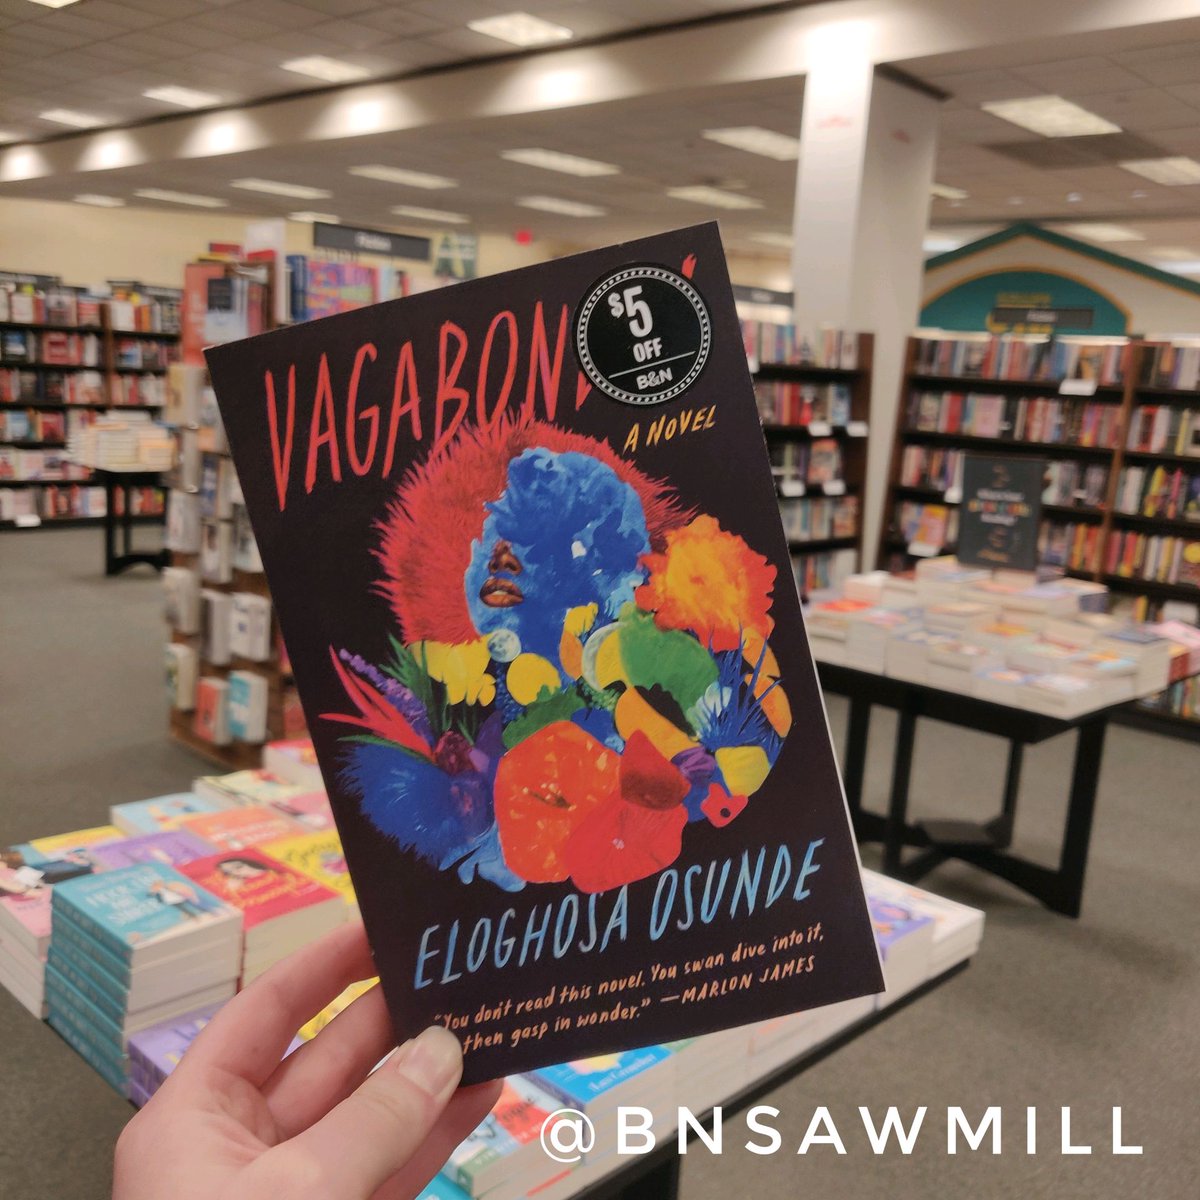 Vagabonds! Is one of the best books of the year and this months Discover pick!

#bndiscoverpick #vagabonds #discoverbook #bnsawmill #newbooks #fiction #lgbtbooks #nigerianfiction #barnesandnoble